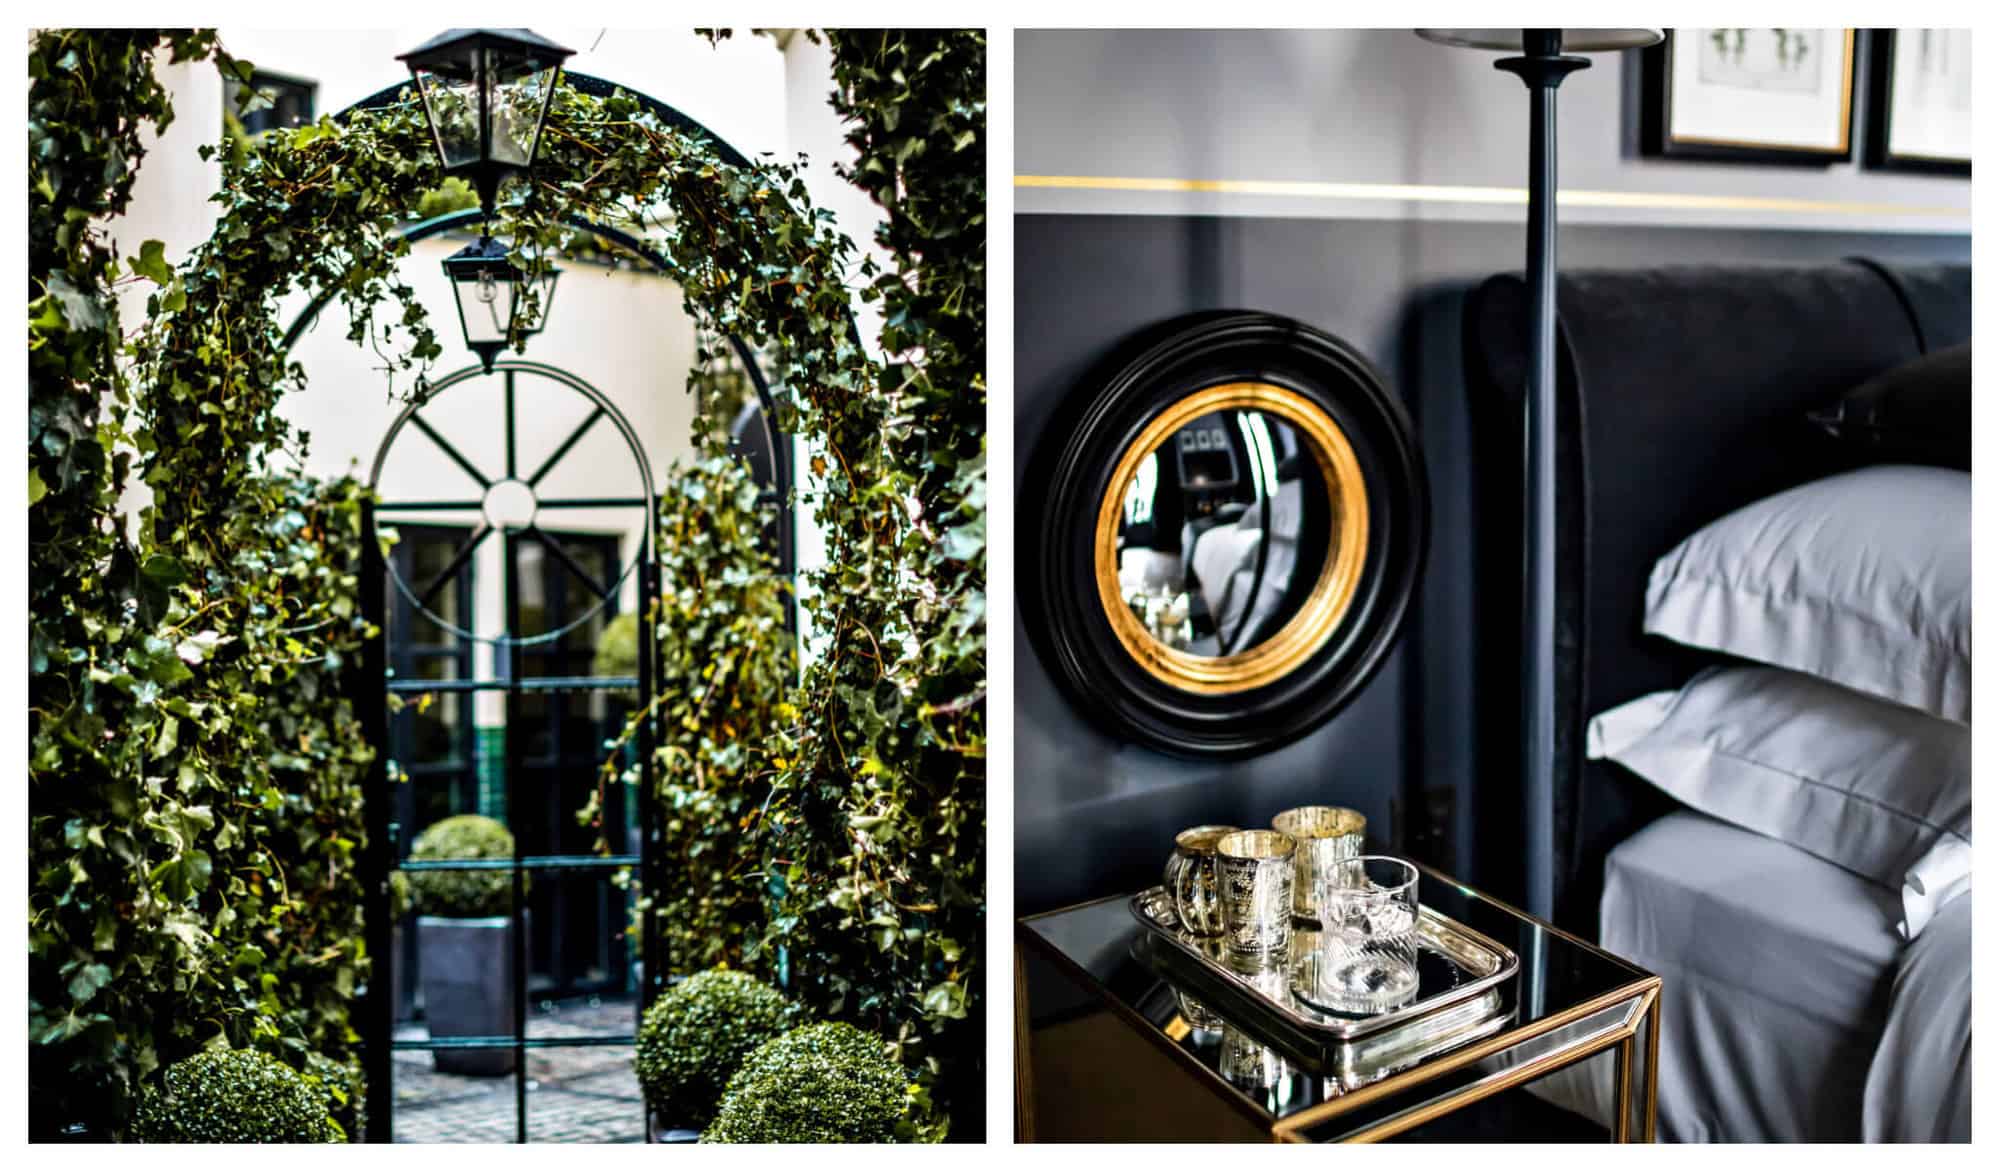 Left: A courtyard gate at Monsieur George hotel and Spa covered with green vines. Right: A bedside table in the hotel with 3 silver mugs, a whisky glass, and a black and brown mirror.